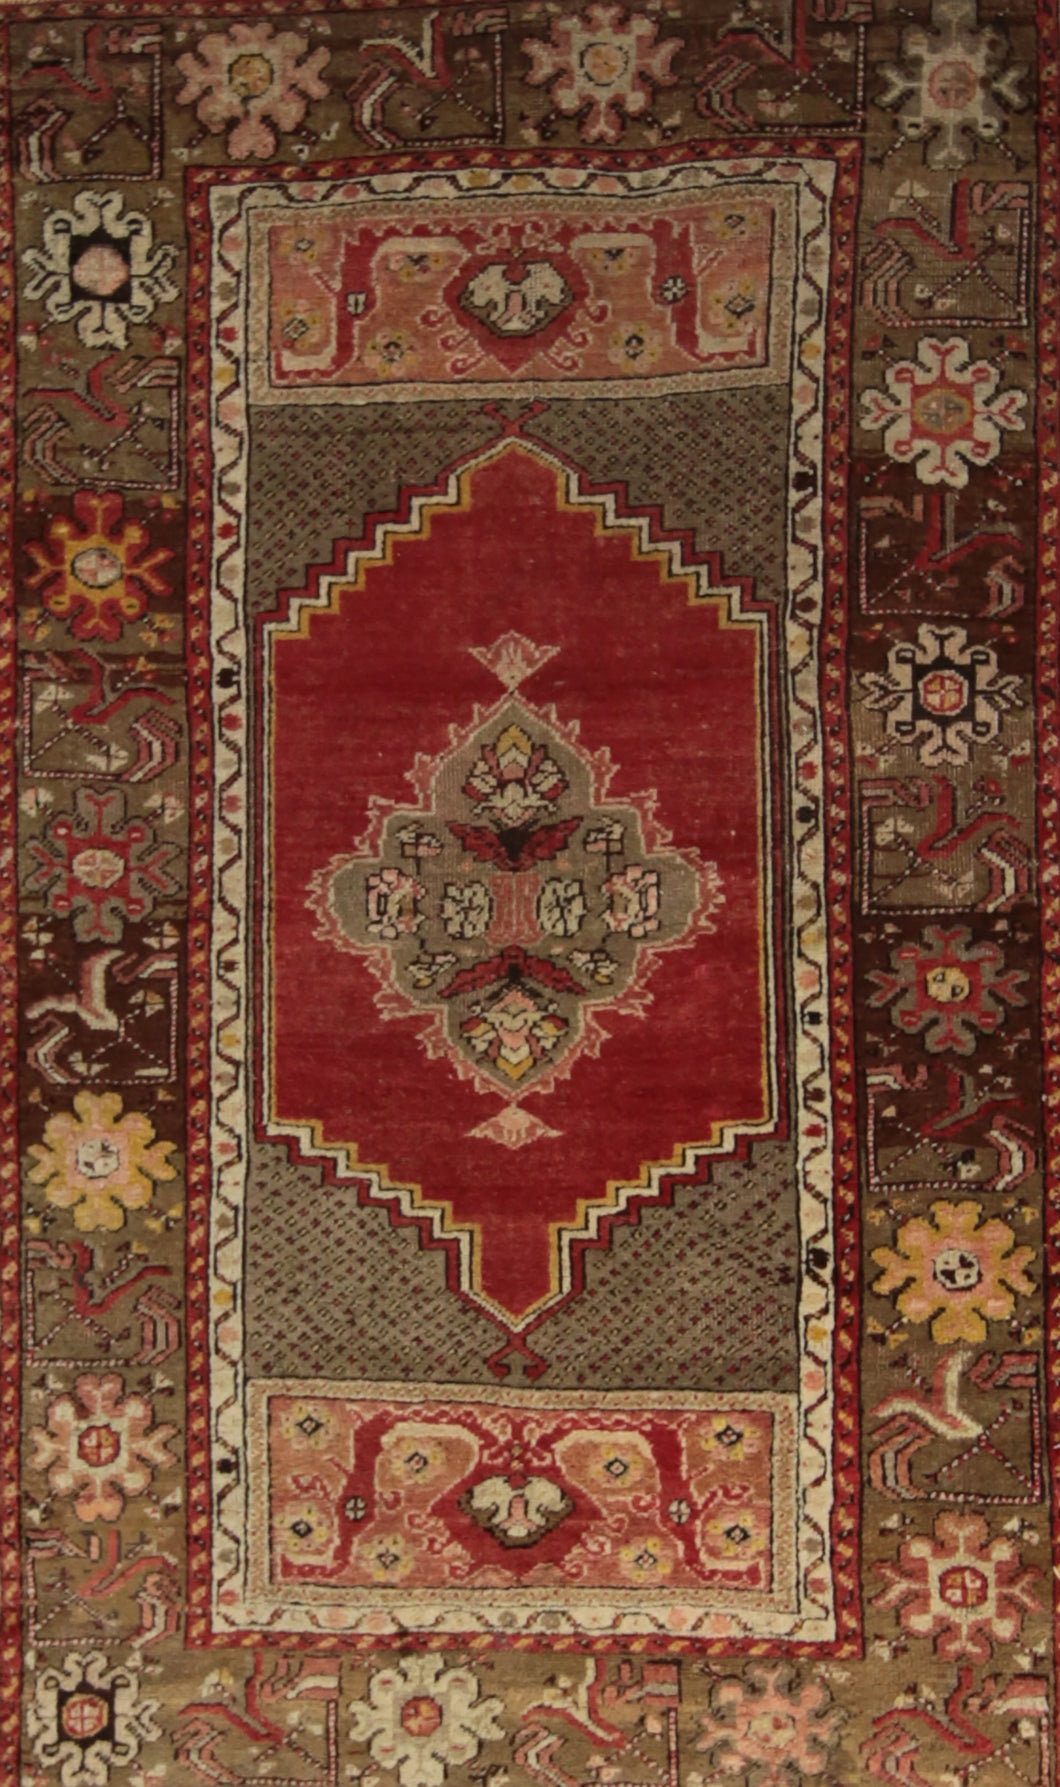 Antique Vegetable Dye Anatolian Turkish Area Rug 3x5 One of a Kind